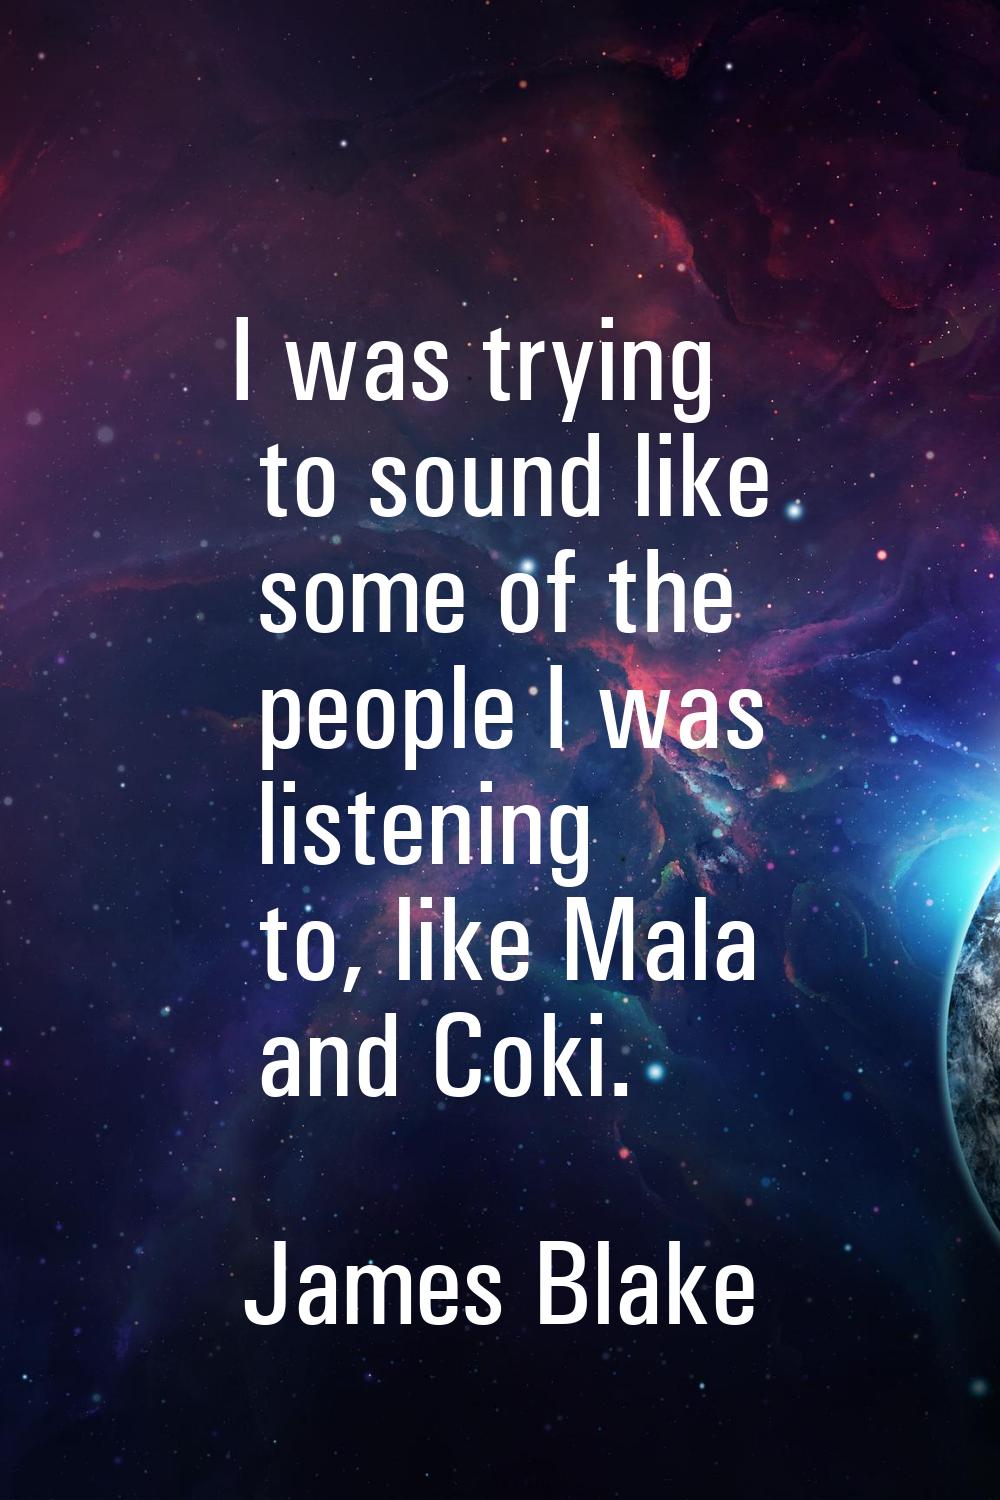 I was trying to sound like some of the people I was listening to, like Mala and Coki.